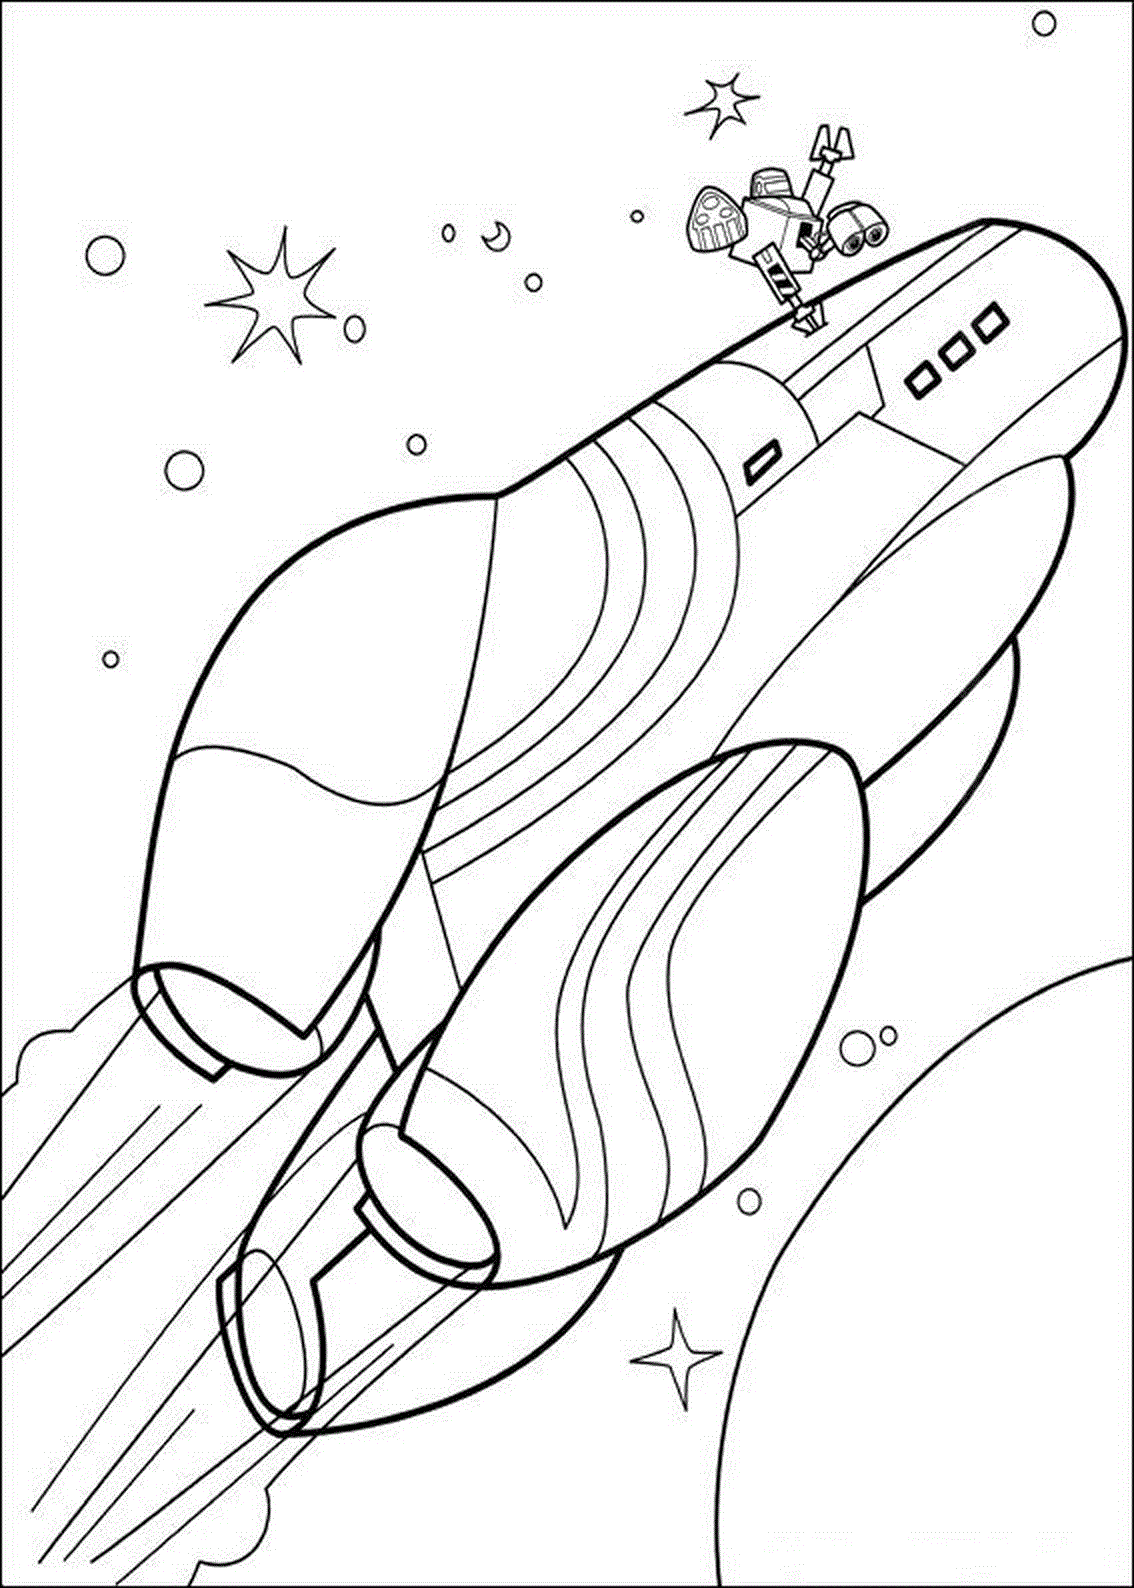 Wall E Kleurplaten Raket Coloring Pages Coloring Pages For Kids Wall E